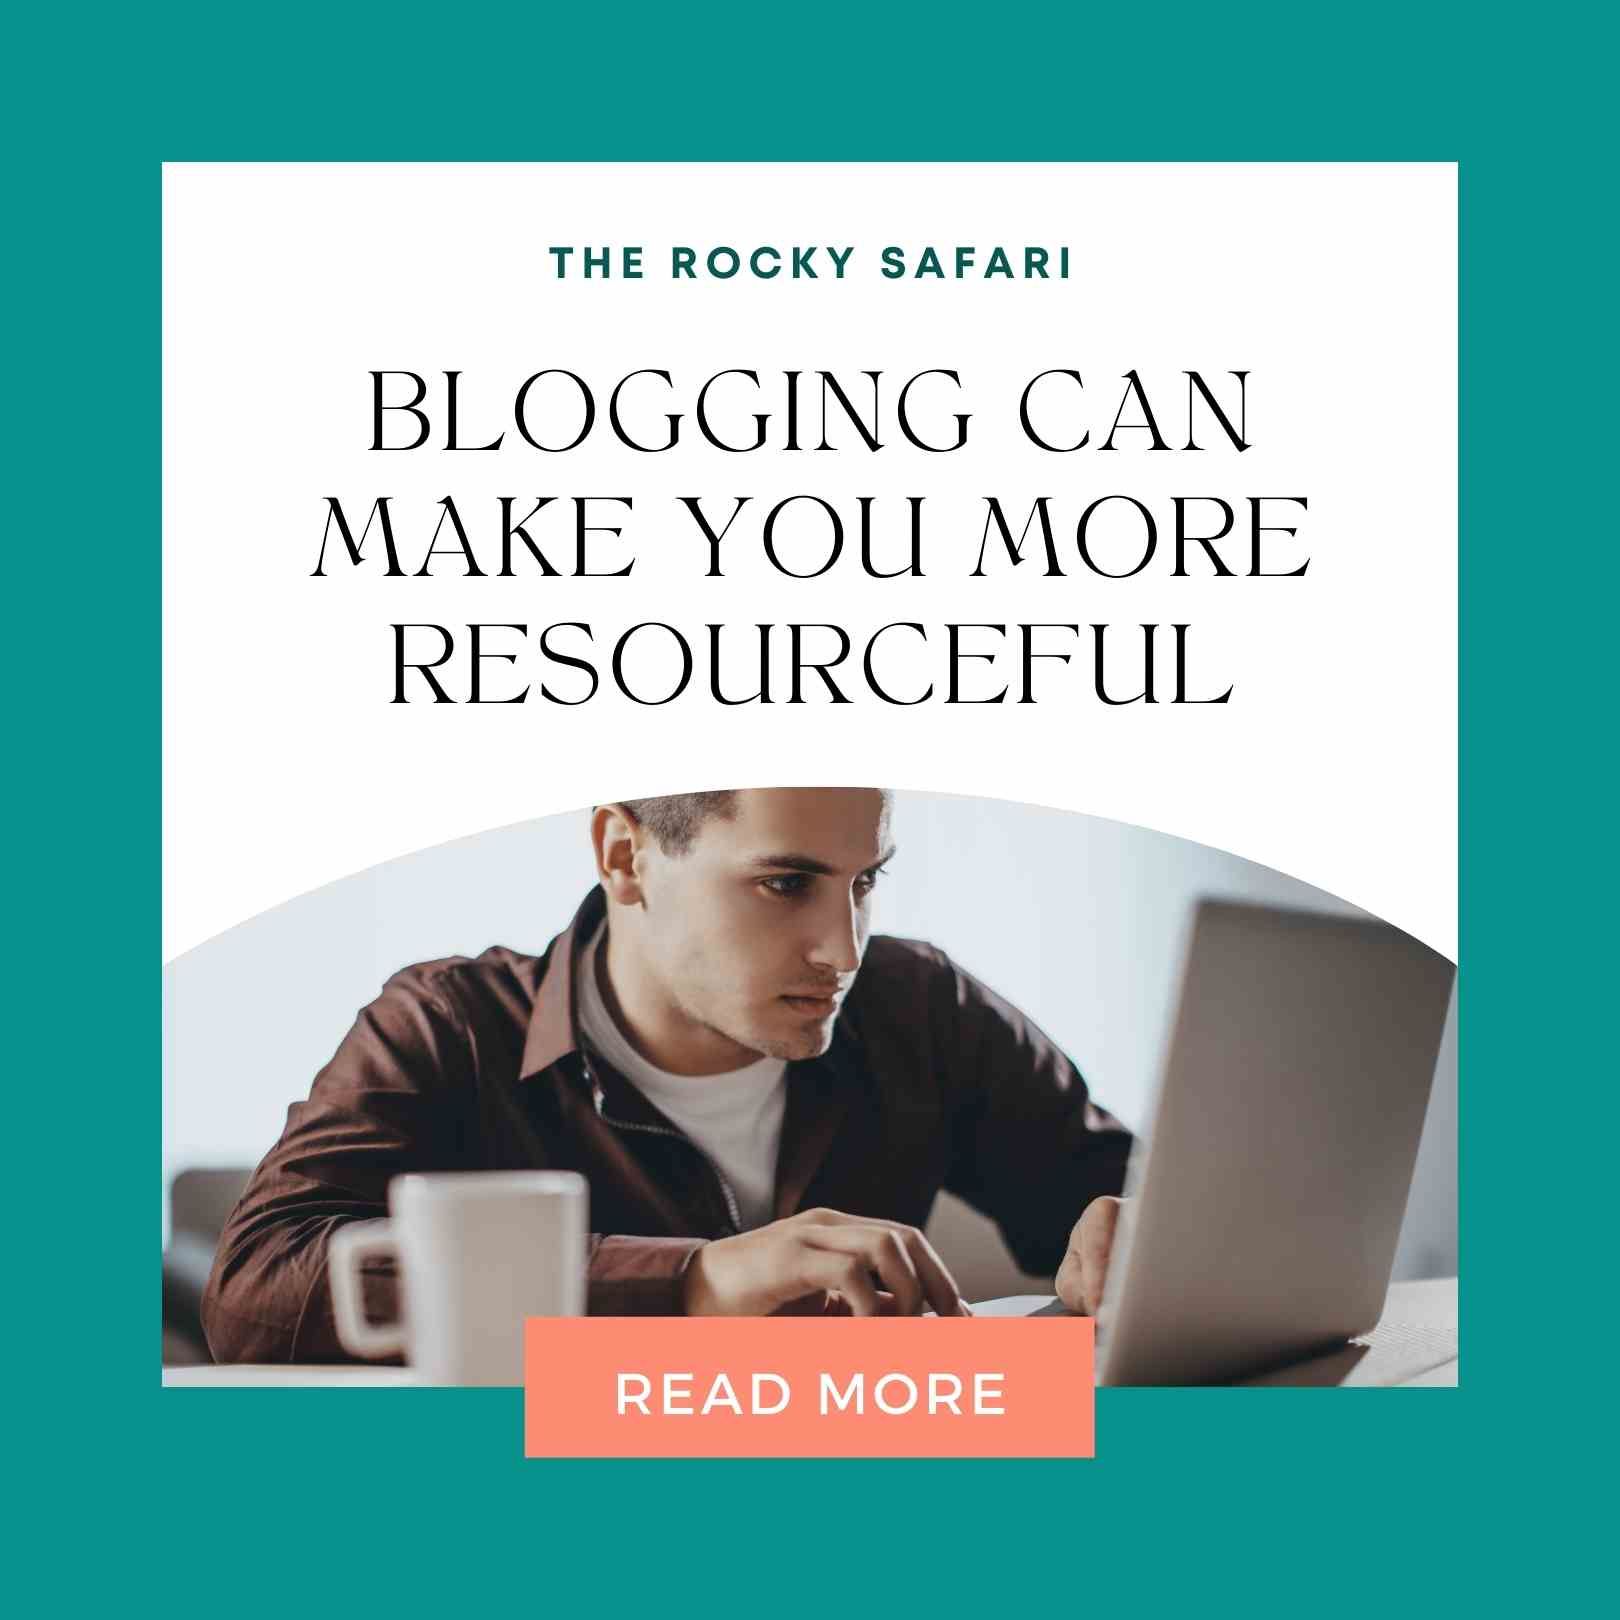 BLOGGING CAN MAKE YOU MORE RESOURCEFUL